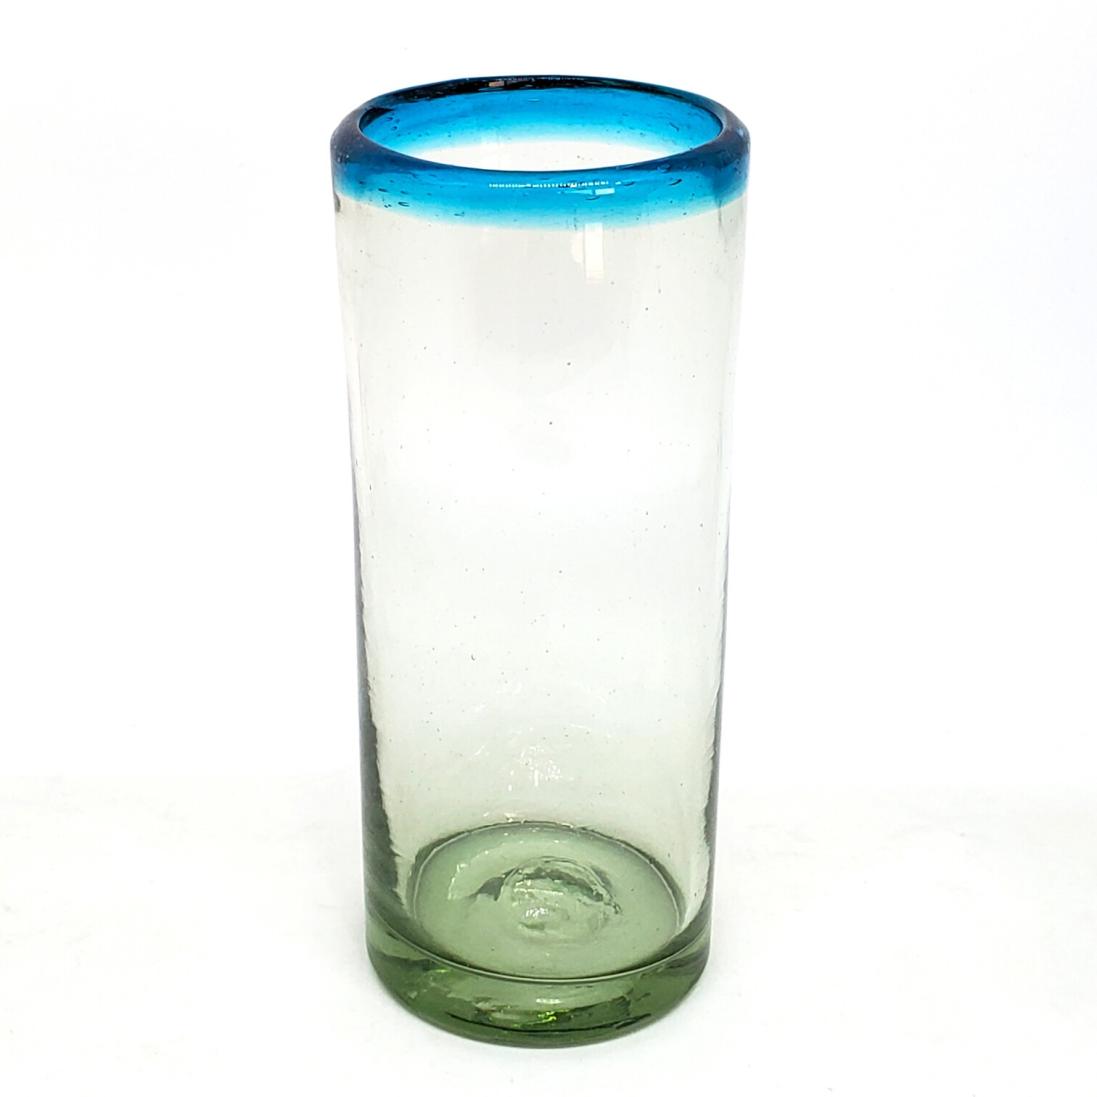 Wholesale Mexican Glasses / Aqua Blue Rim 15 oz Highball Glasses  / Enjoy mojitos, cubas or any other refreshing drink with these classy highball glasses.